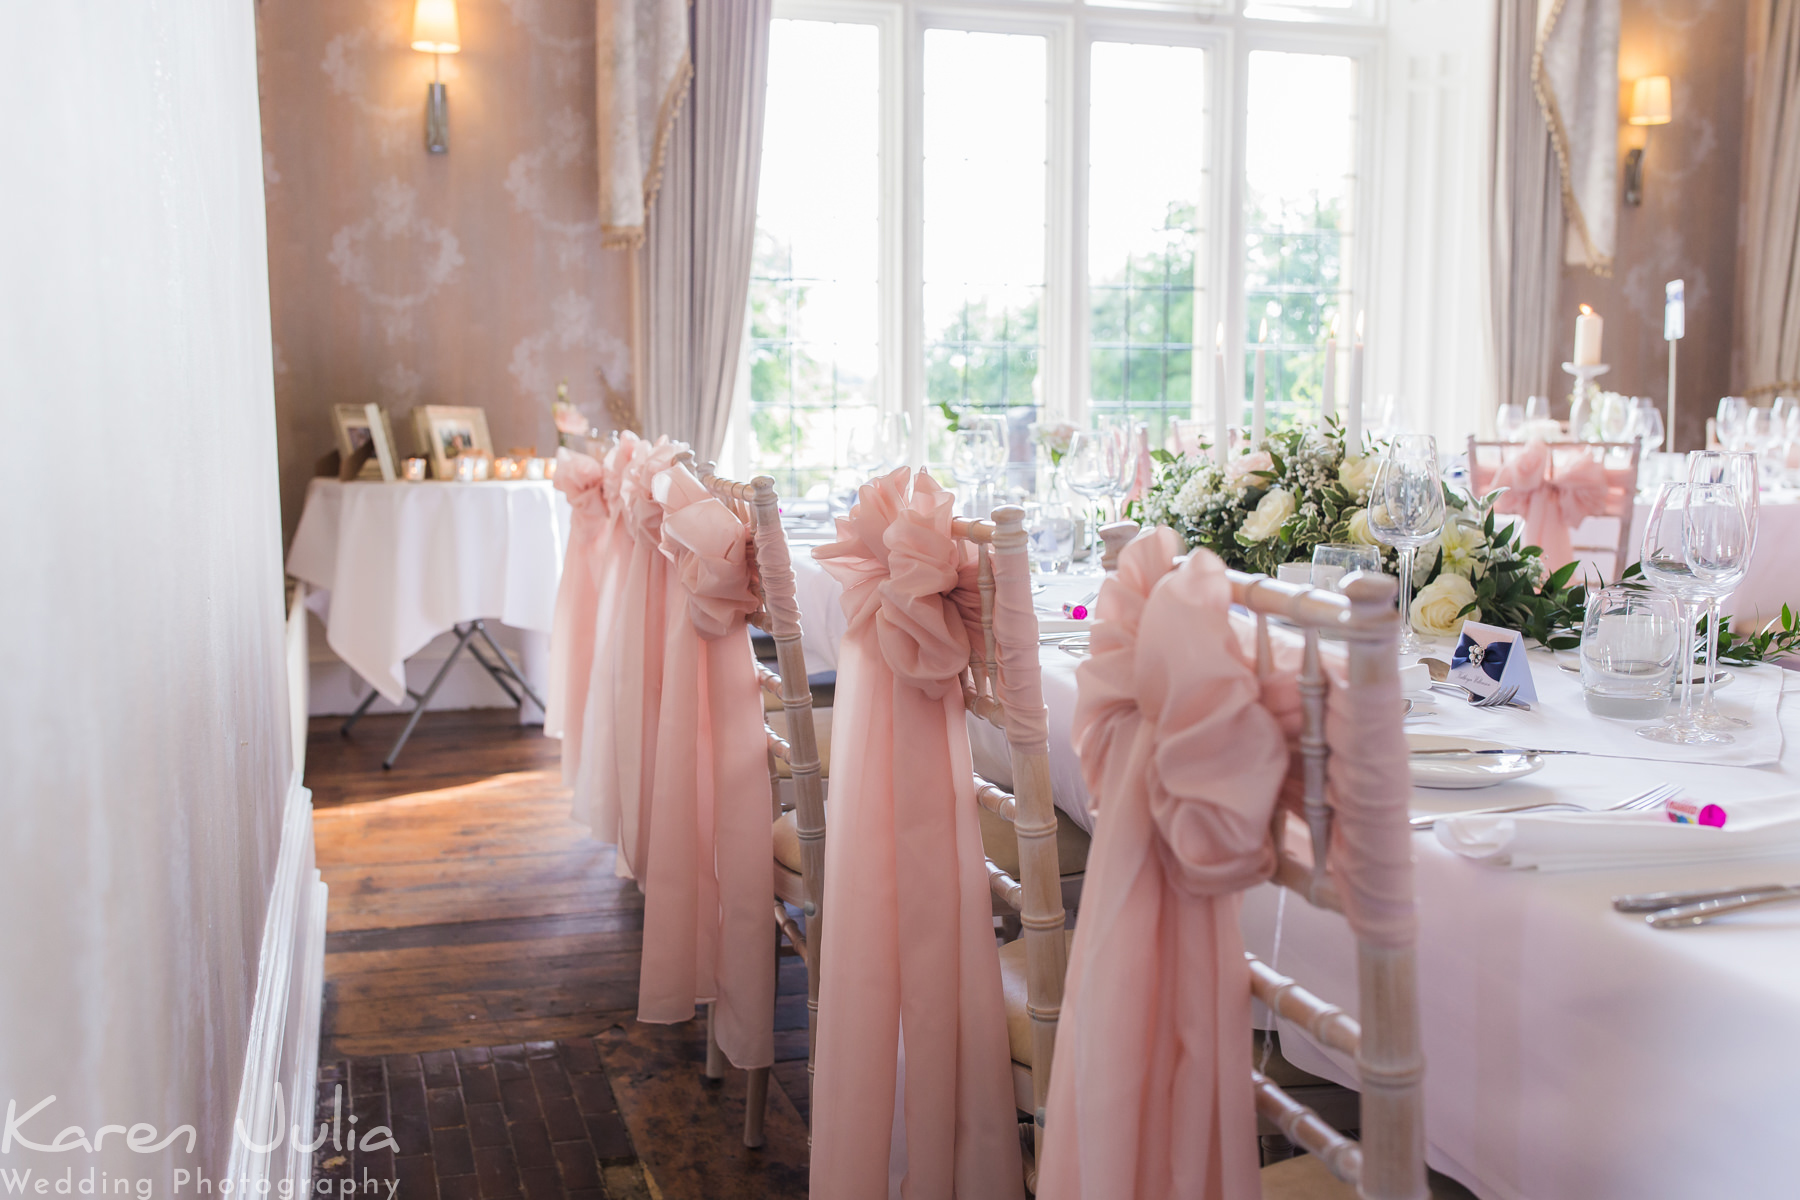 blush and blue colour scheme in the wedding breakfast room at Falcon Manor